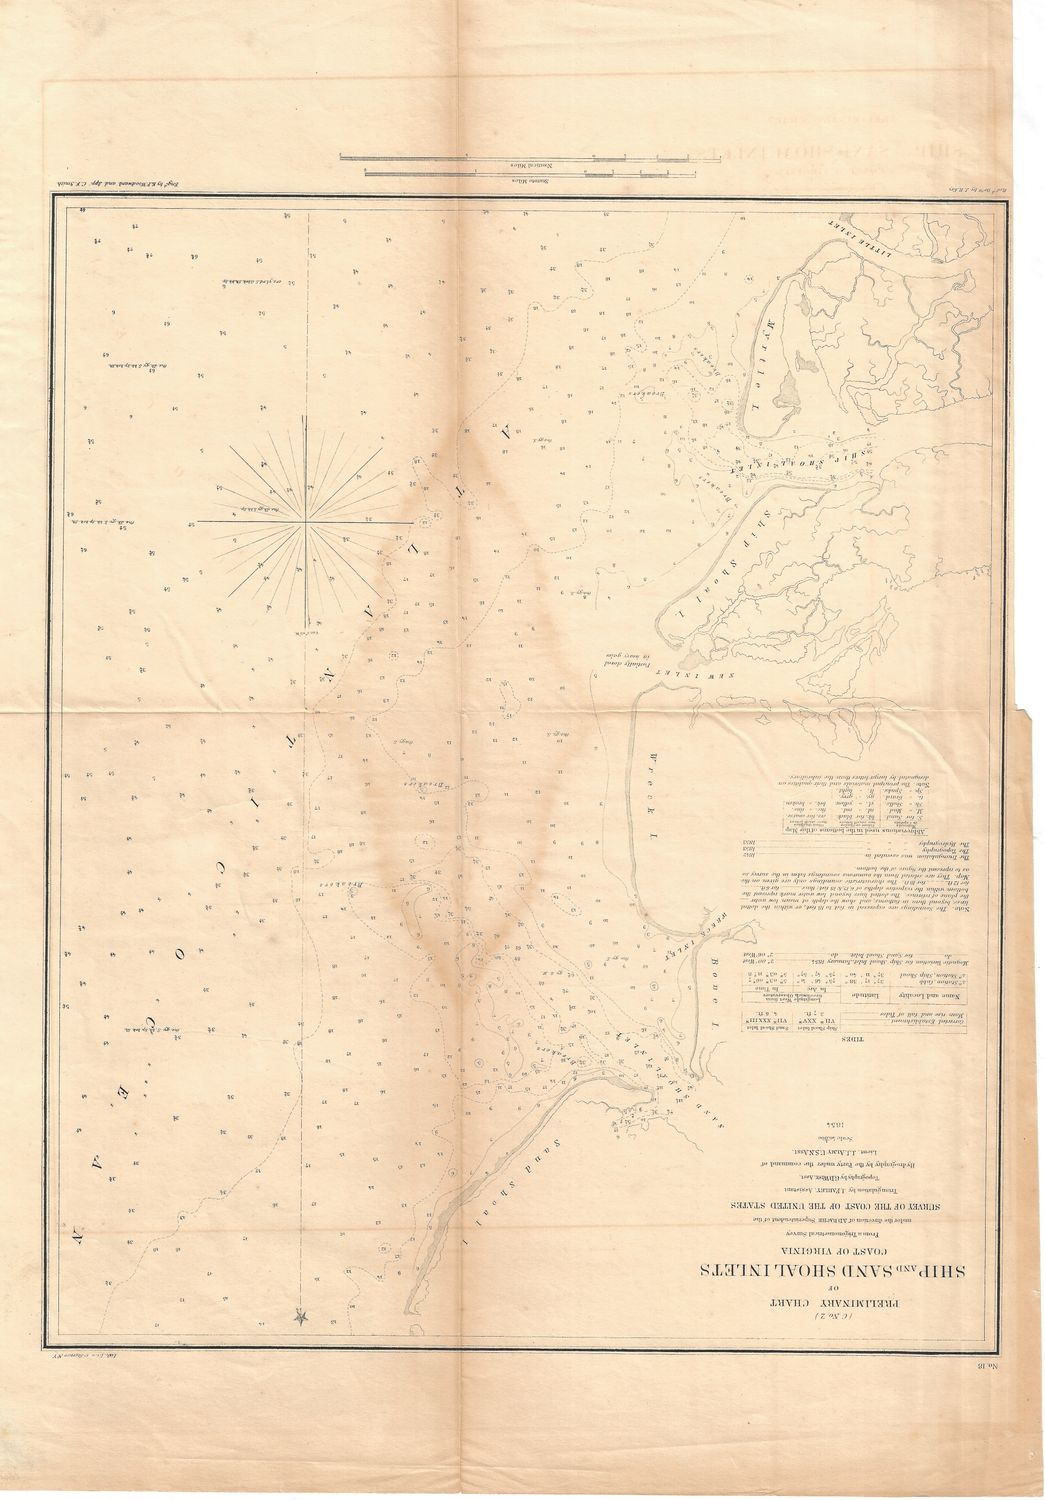 1854 Ship Sand Shoal Inlets VA by the USCS as a Folding Folio in Lithography, as Congressional Documents